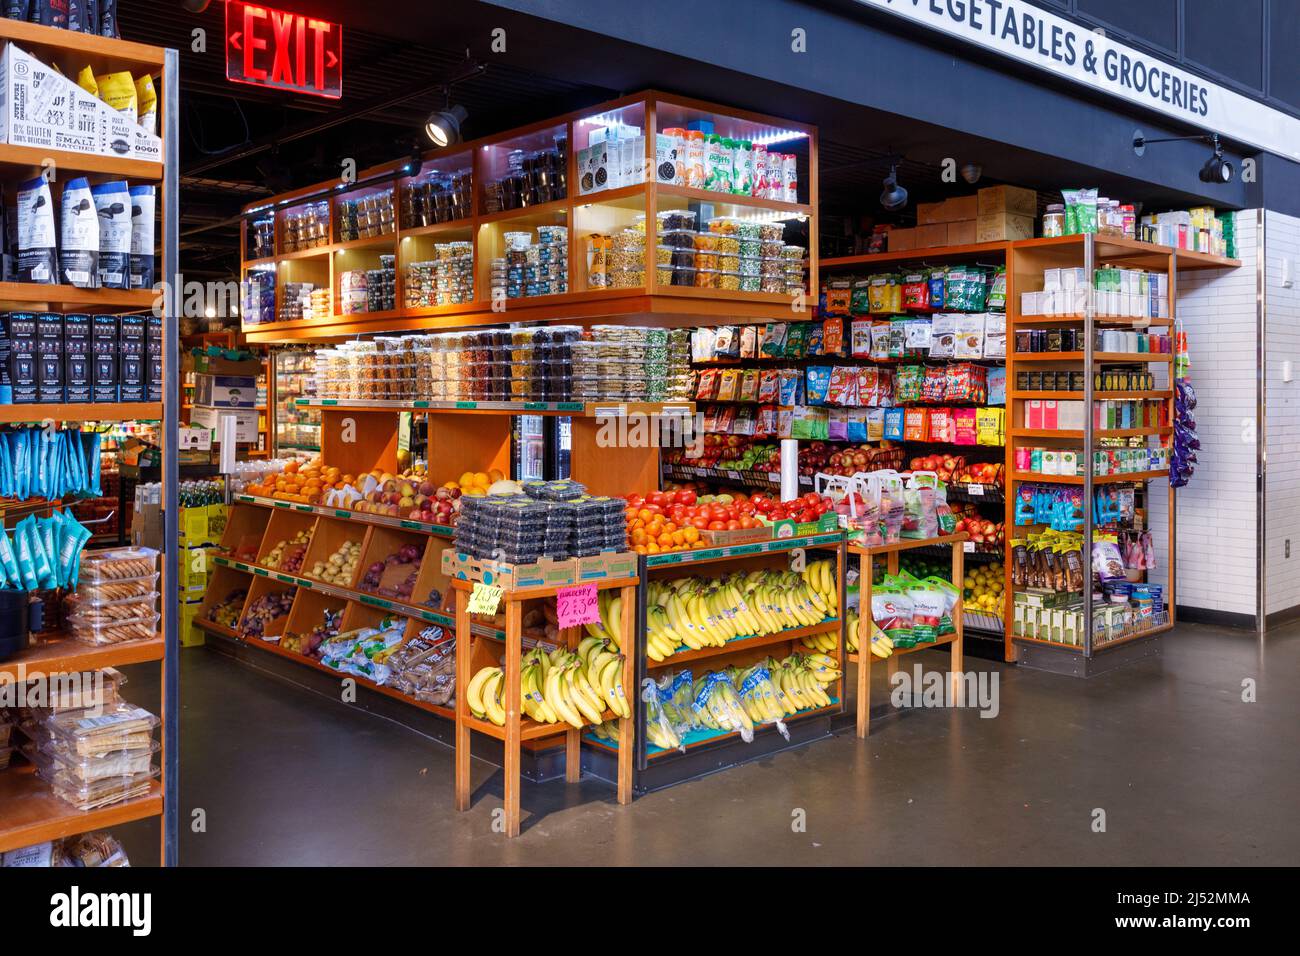 Interior of Essex Market, Lower East Side, New York, NY, USA. Stock Photo